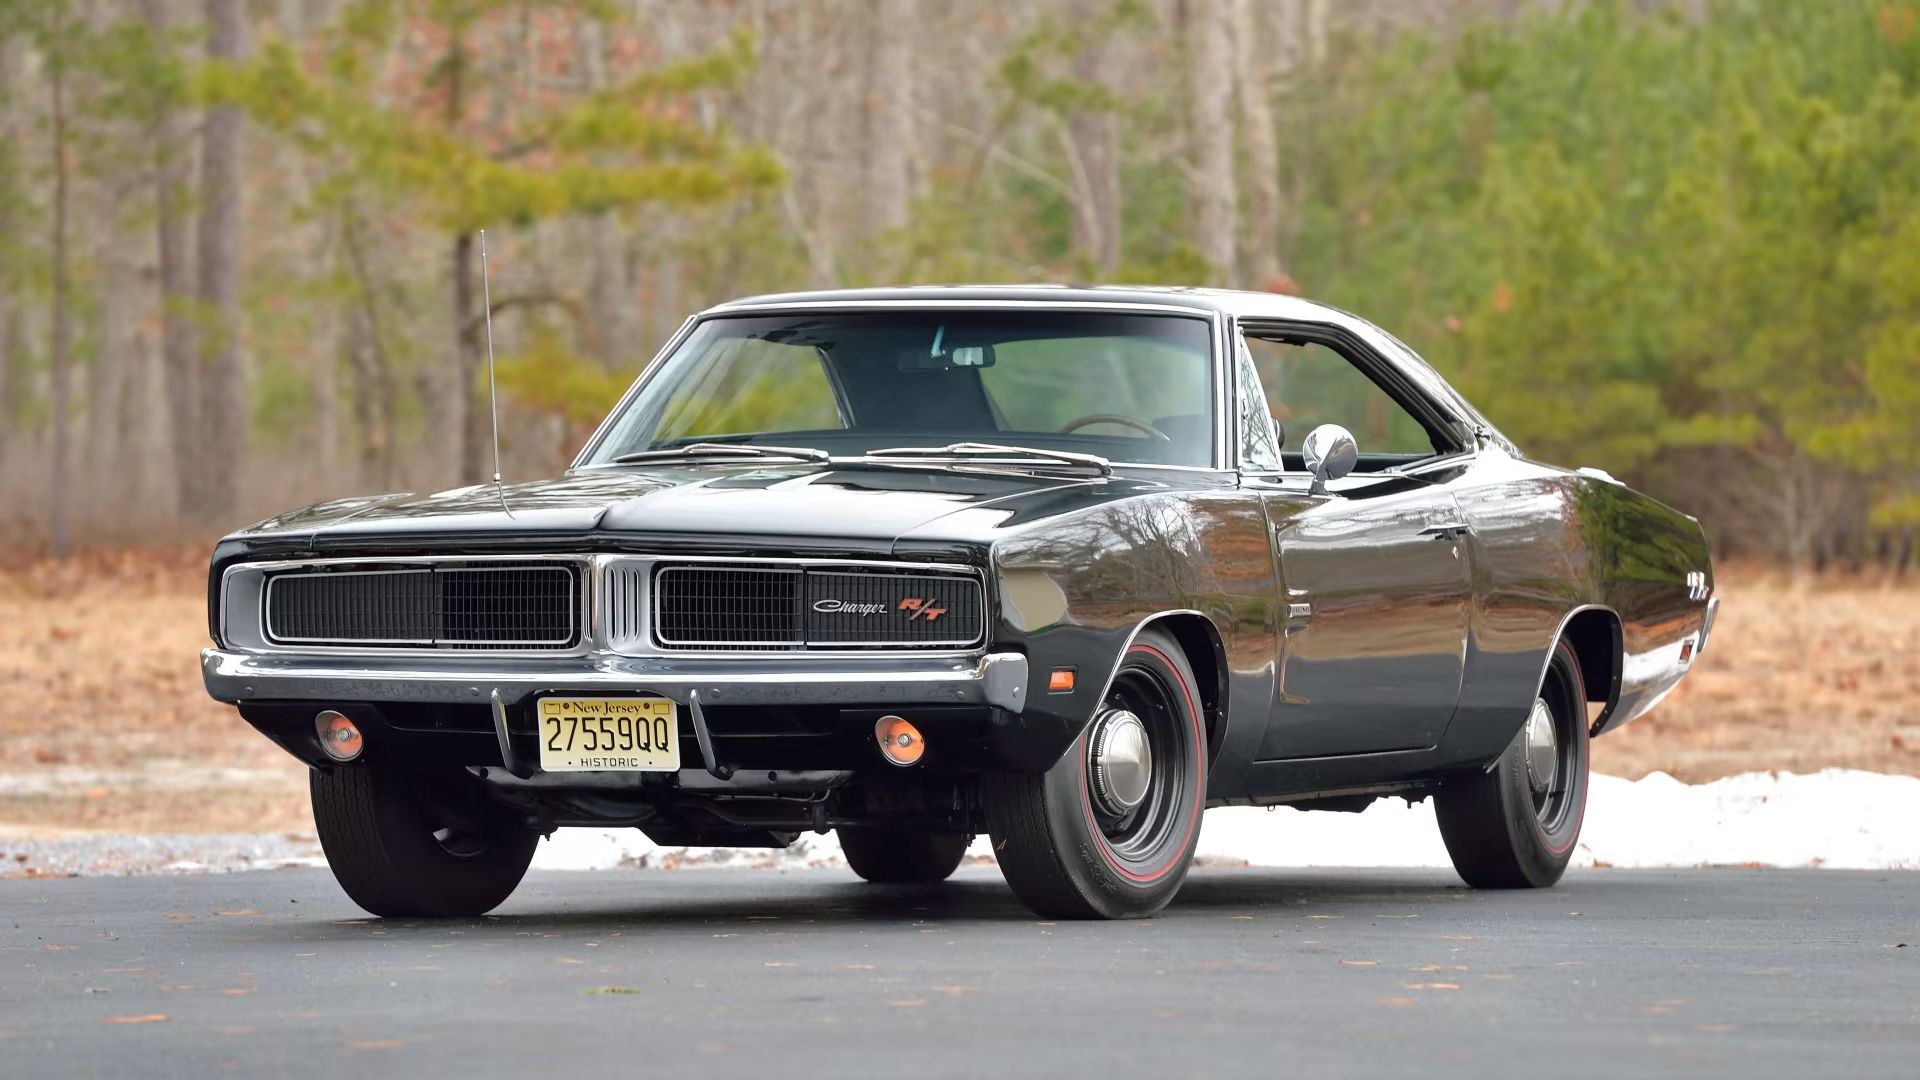 black 1969 Dodge Hemi Charger RT Muscle Car parked outside